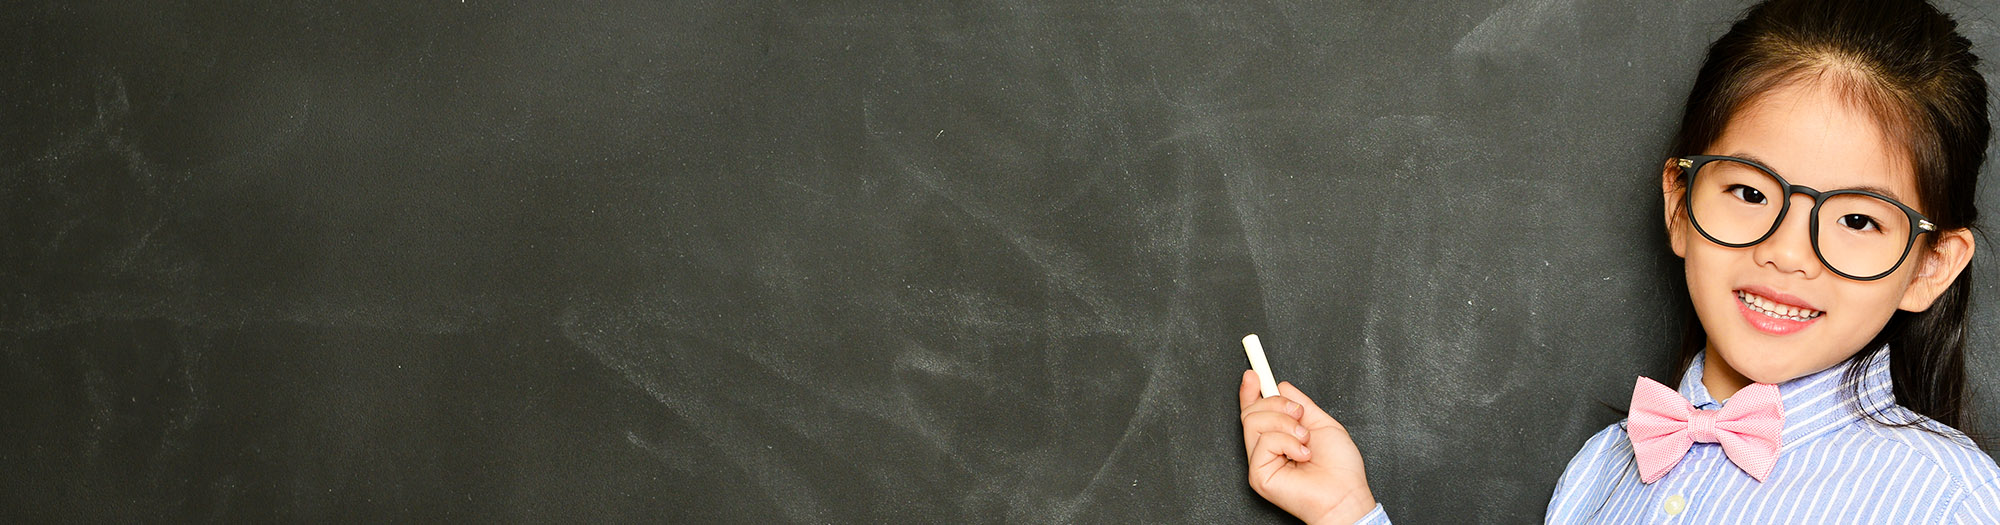 Young girl dressed as a teacher in front of chalkboard